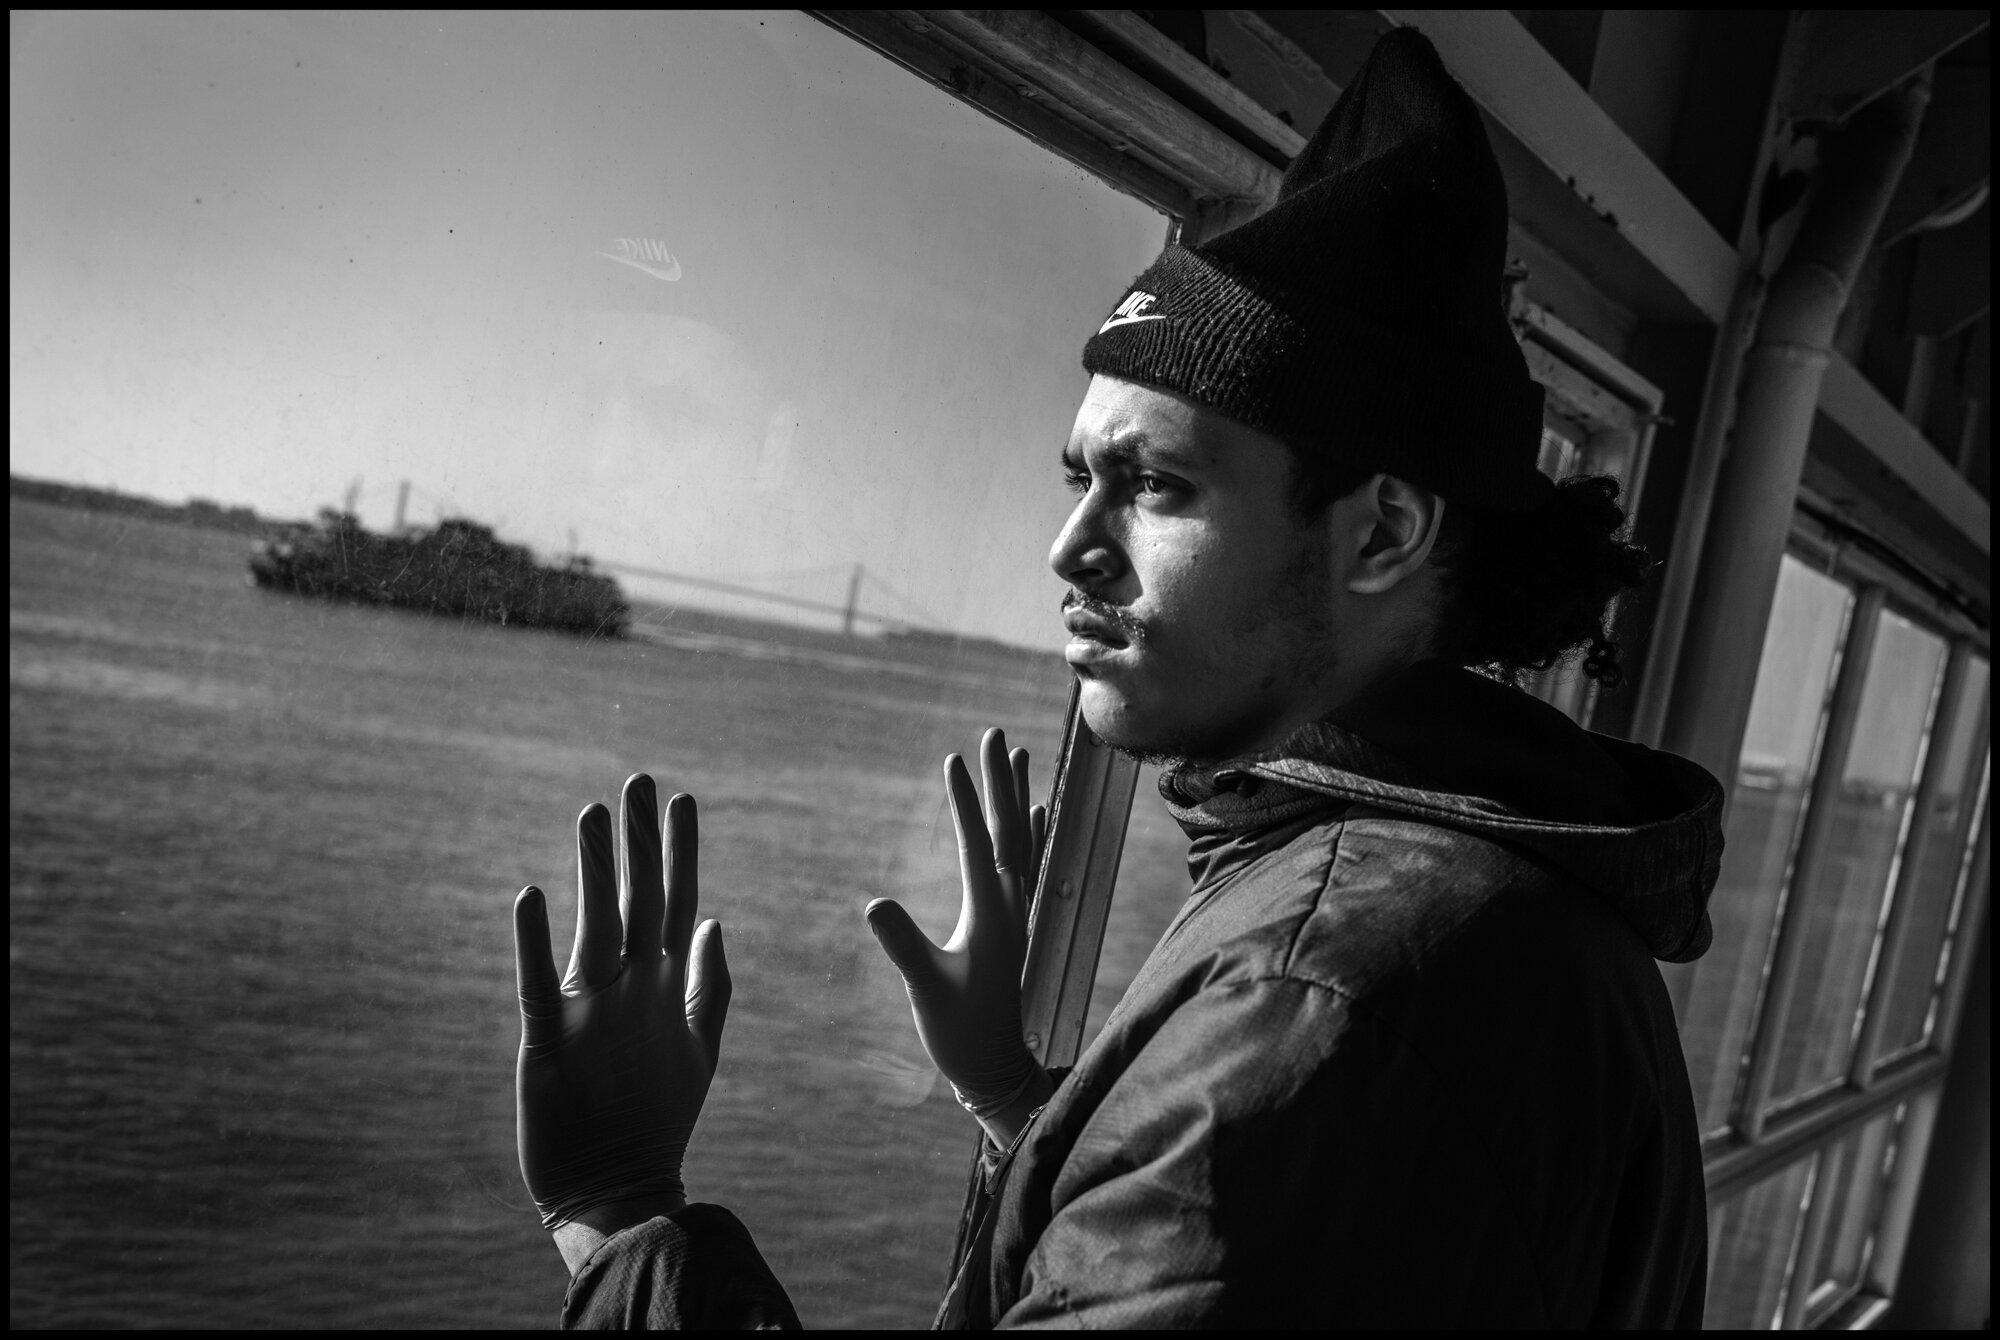  Pedro, 21, grew up in Spanish Harlem. He rides the Staten Island Ferry to visit his girlfriend. I asked him how he was doing and he told me, “It’s kind of rough-I was looking for a job, and this is not a good time.”  March 26, 2020 ©Peter Turnley  I